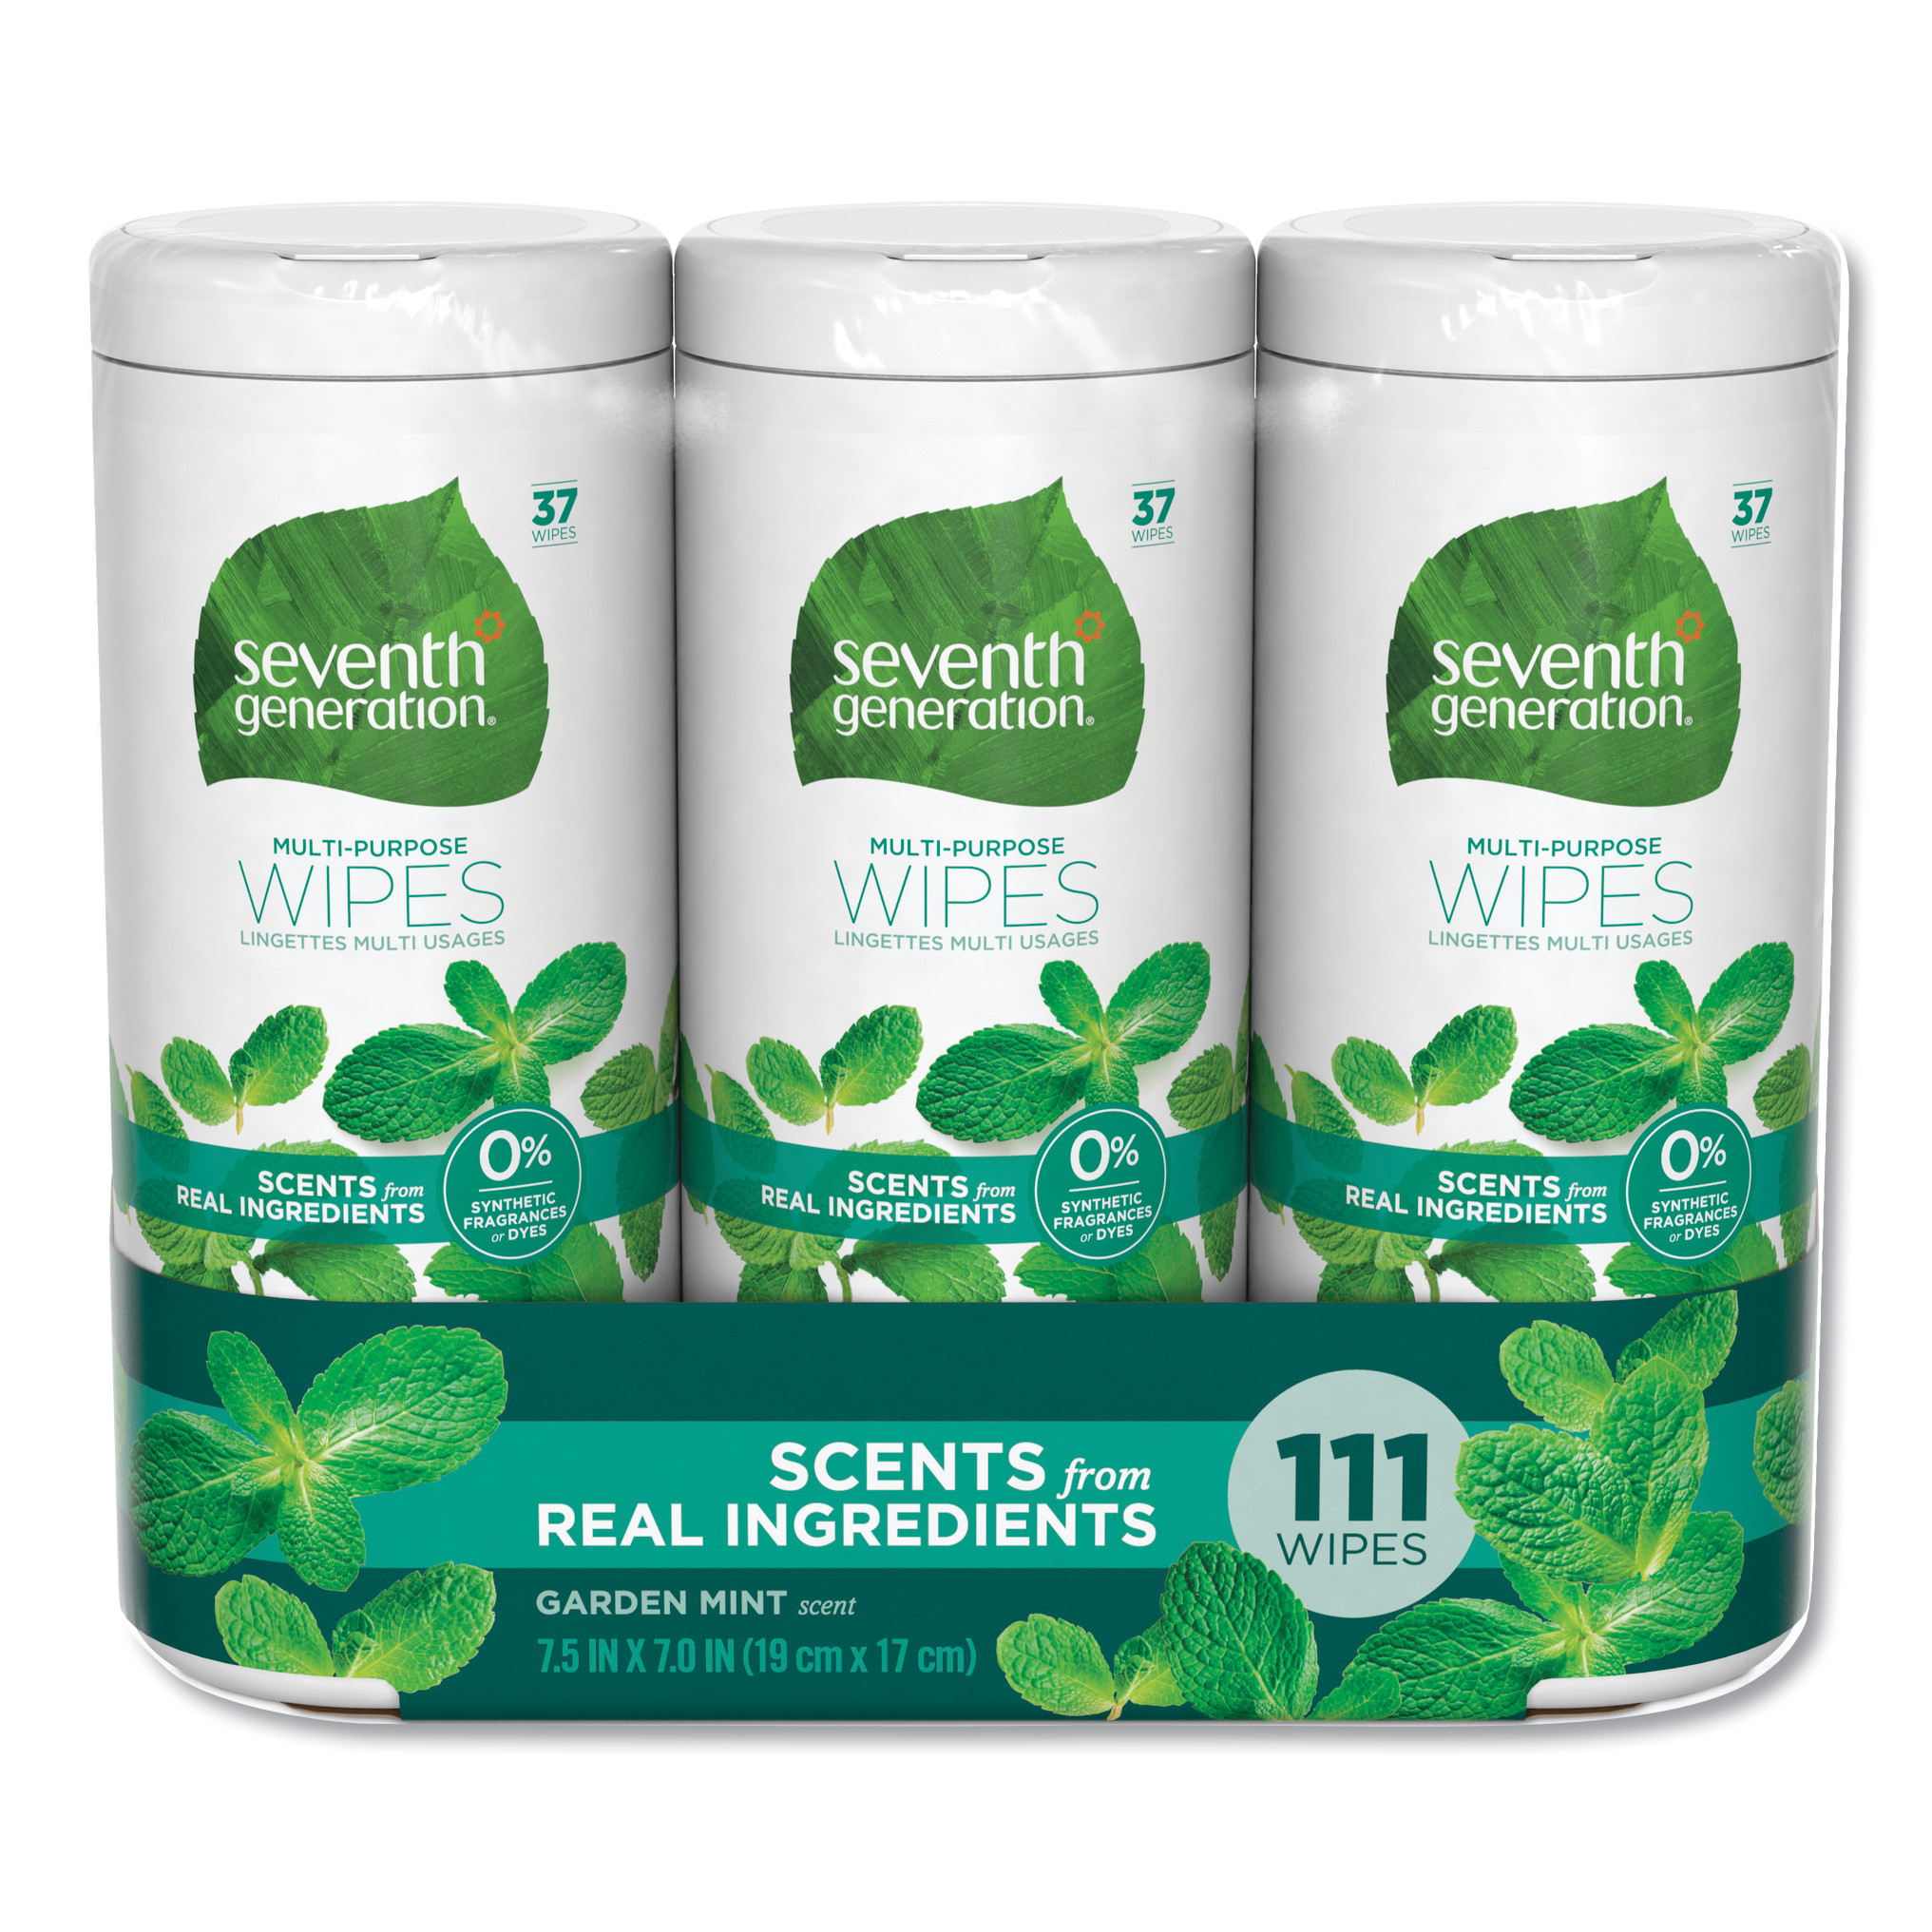  Seventh Generation 44689CT Multi Purpose Wipes, 7 x 7.5, Garden Mint, White, 37 Wipes/Canister, 3 Canisters/Pack, 4 Packs/Carton (SEV44689CT) 